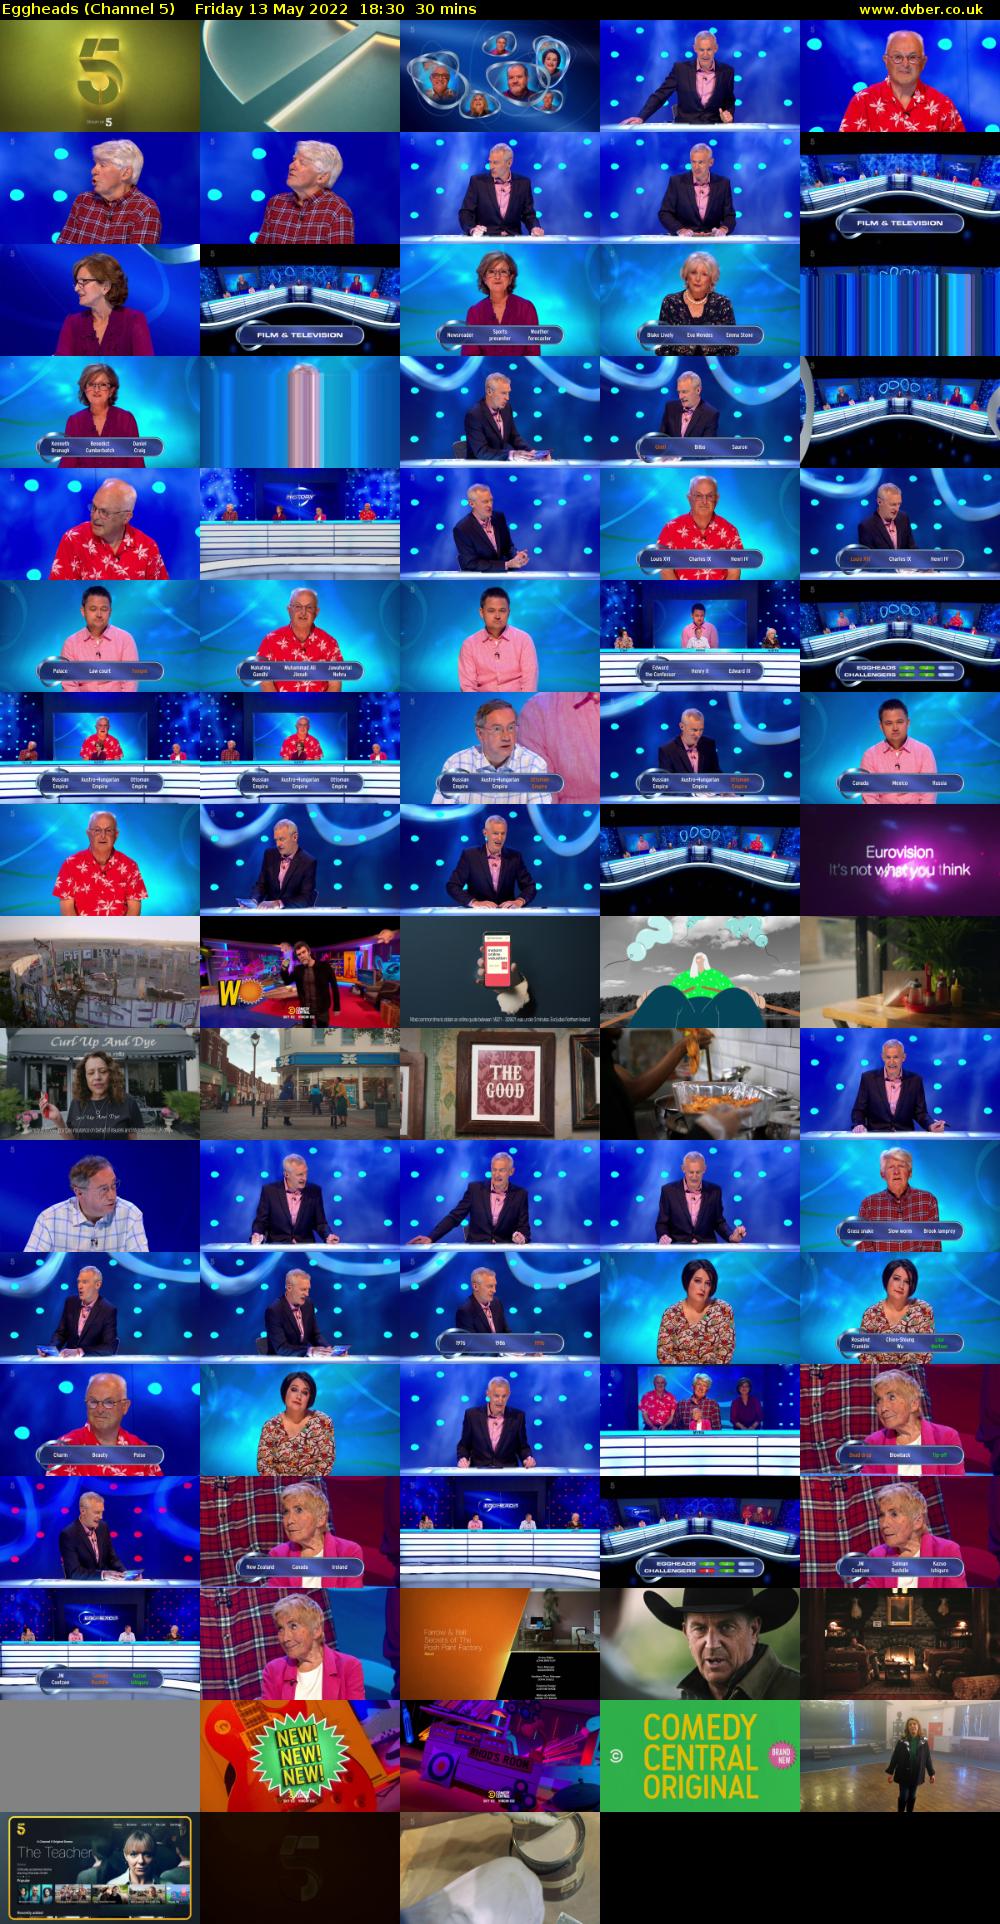 Eggheads (Channel 5) Friday 13 May 2022 18:30 - 19:00